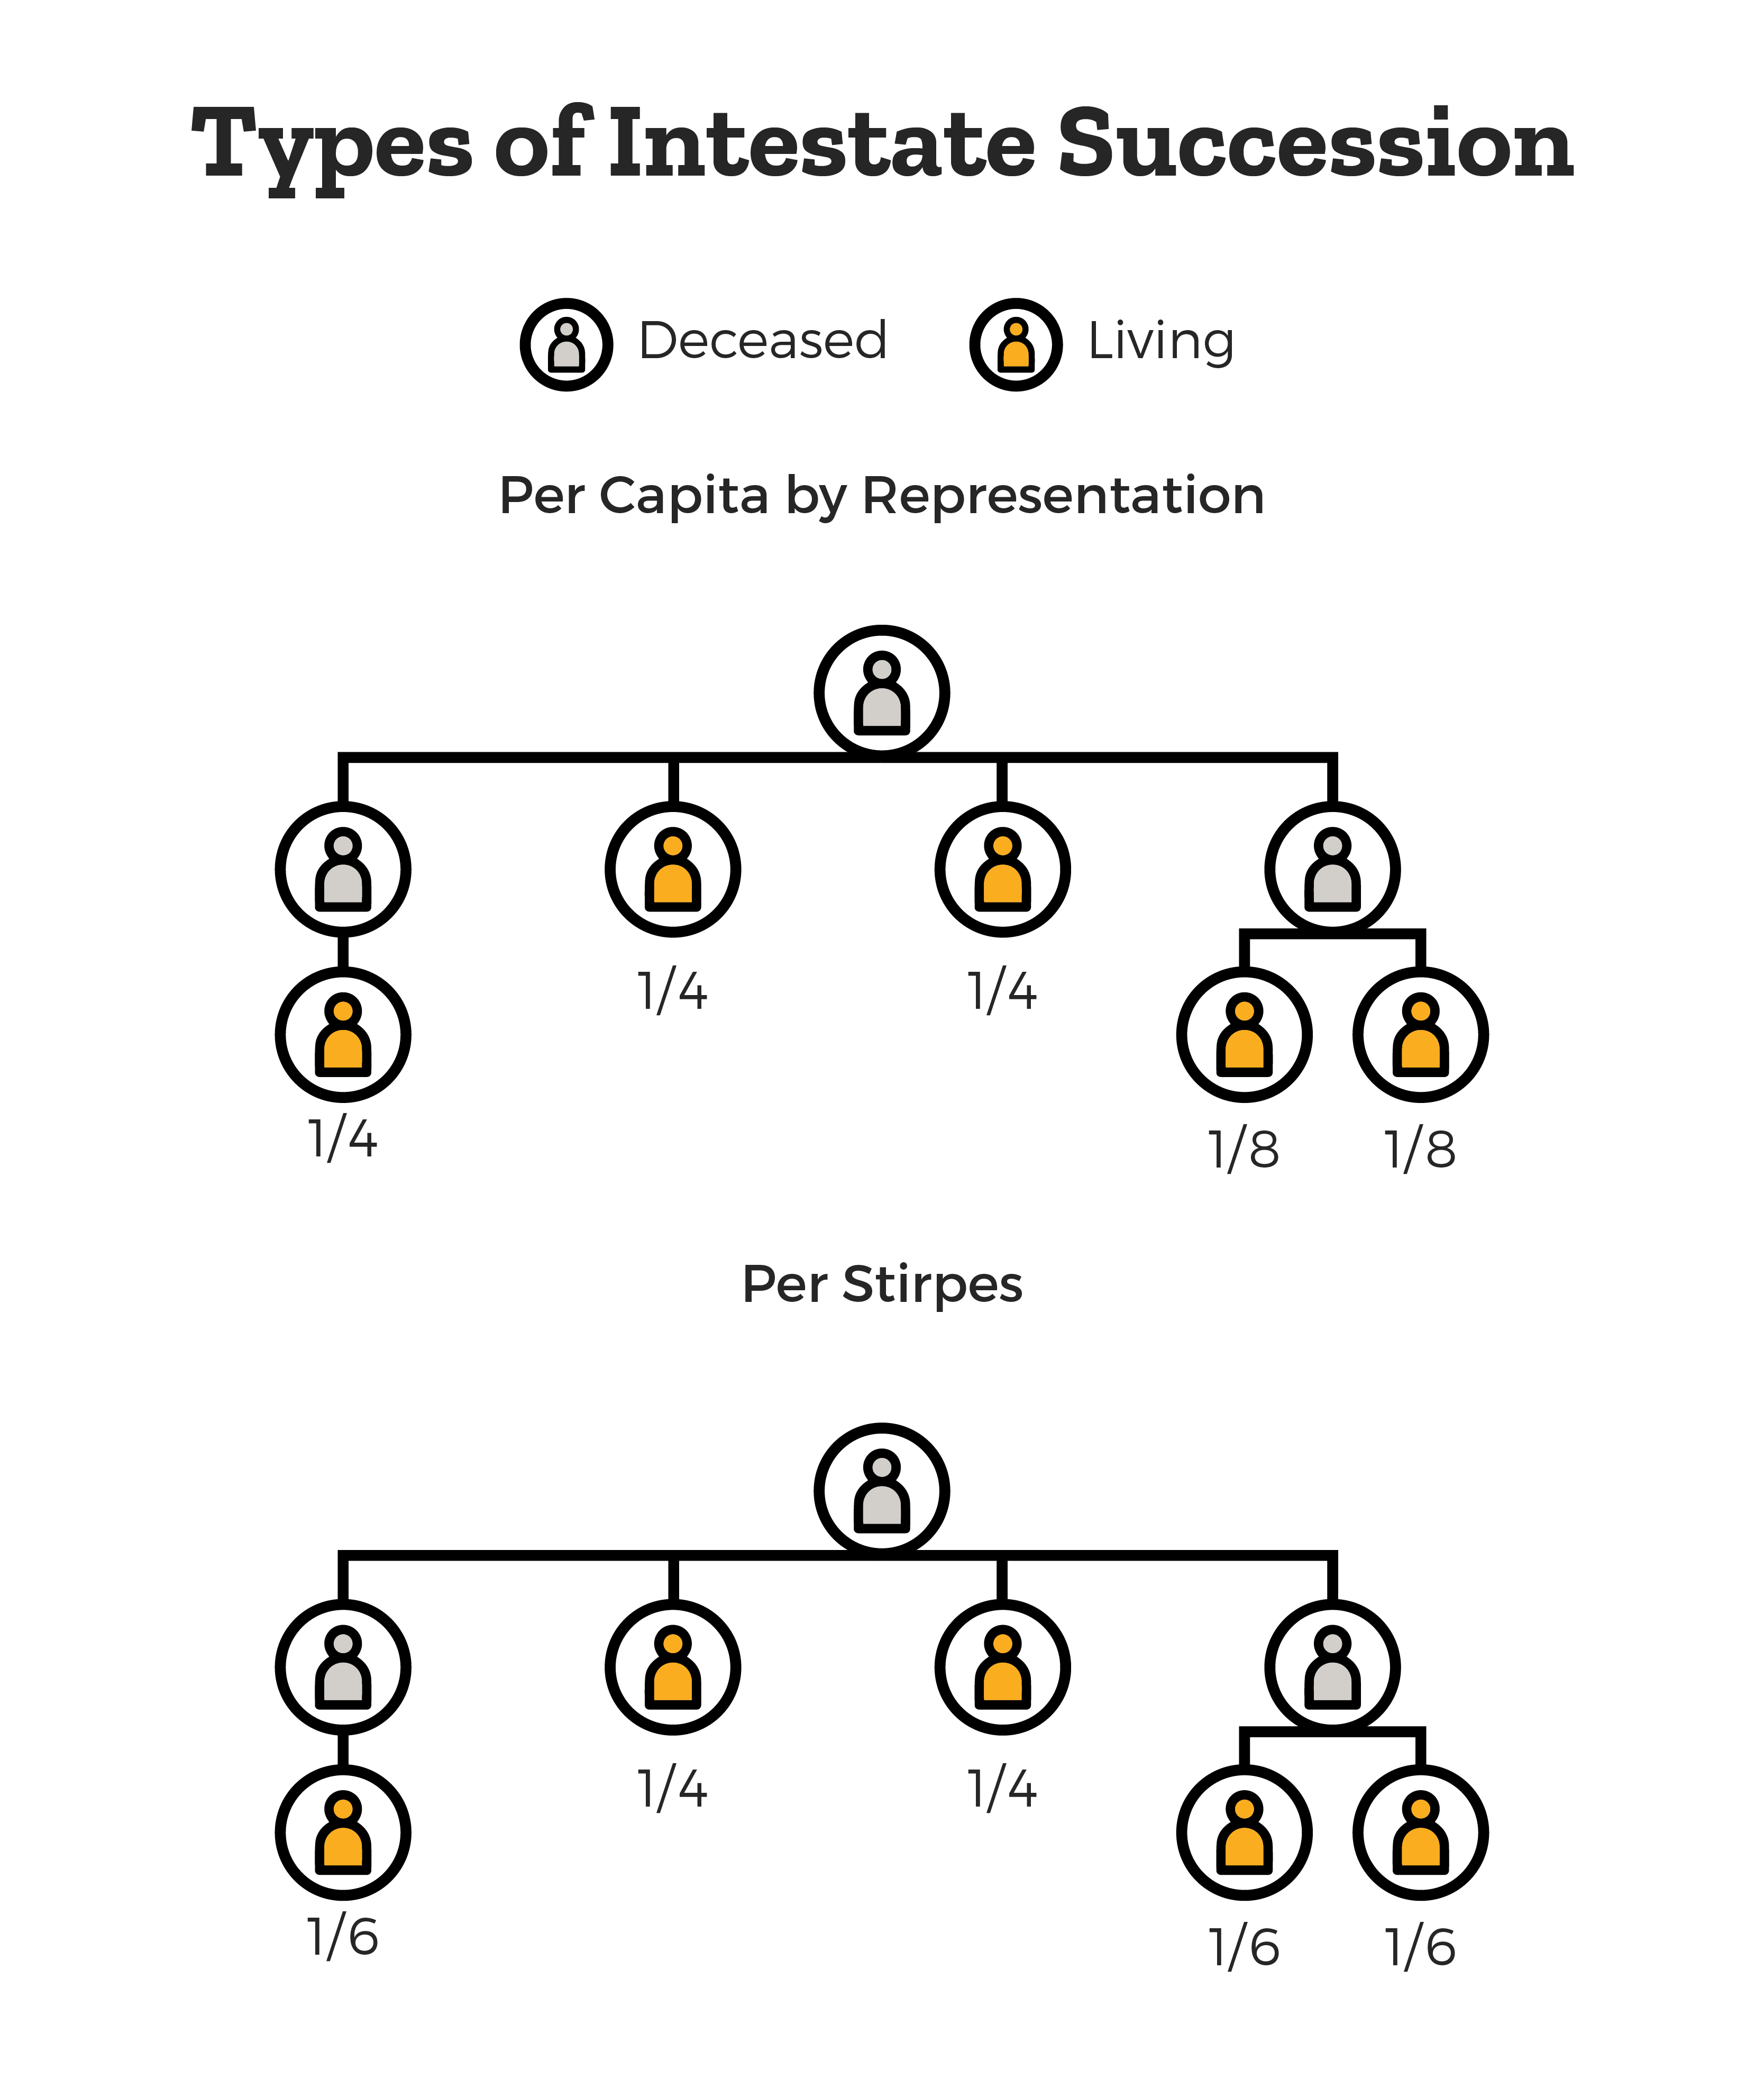 This image visualizes types of intestate succession and shows the distributions of per capita by representation and per stirpes. 